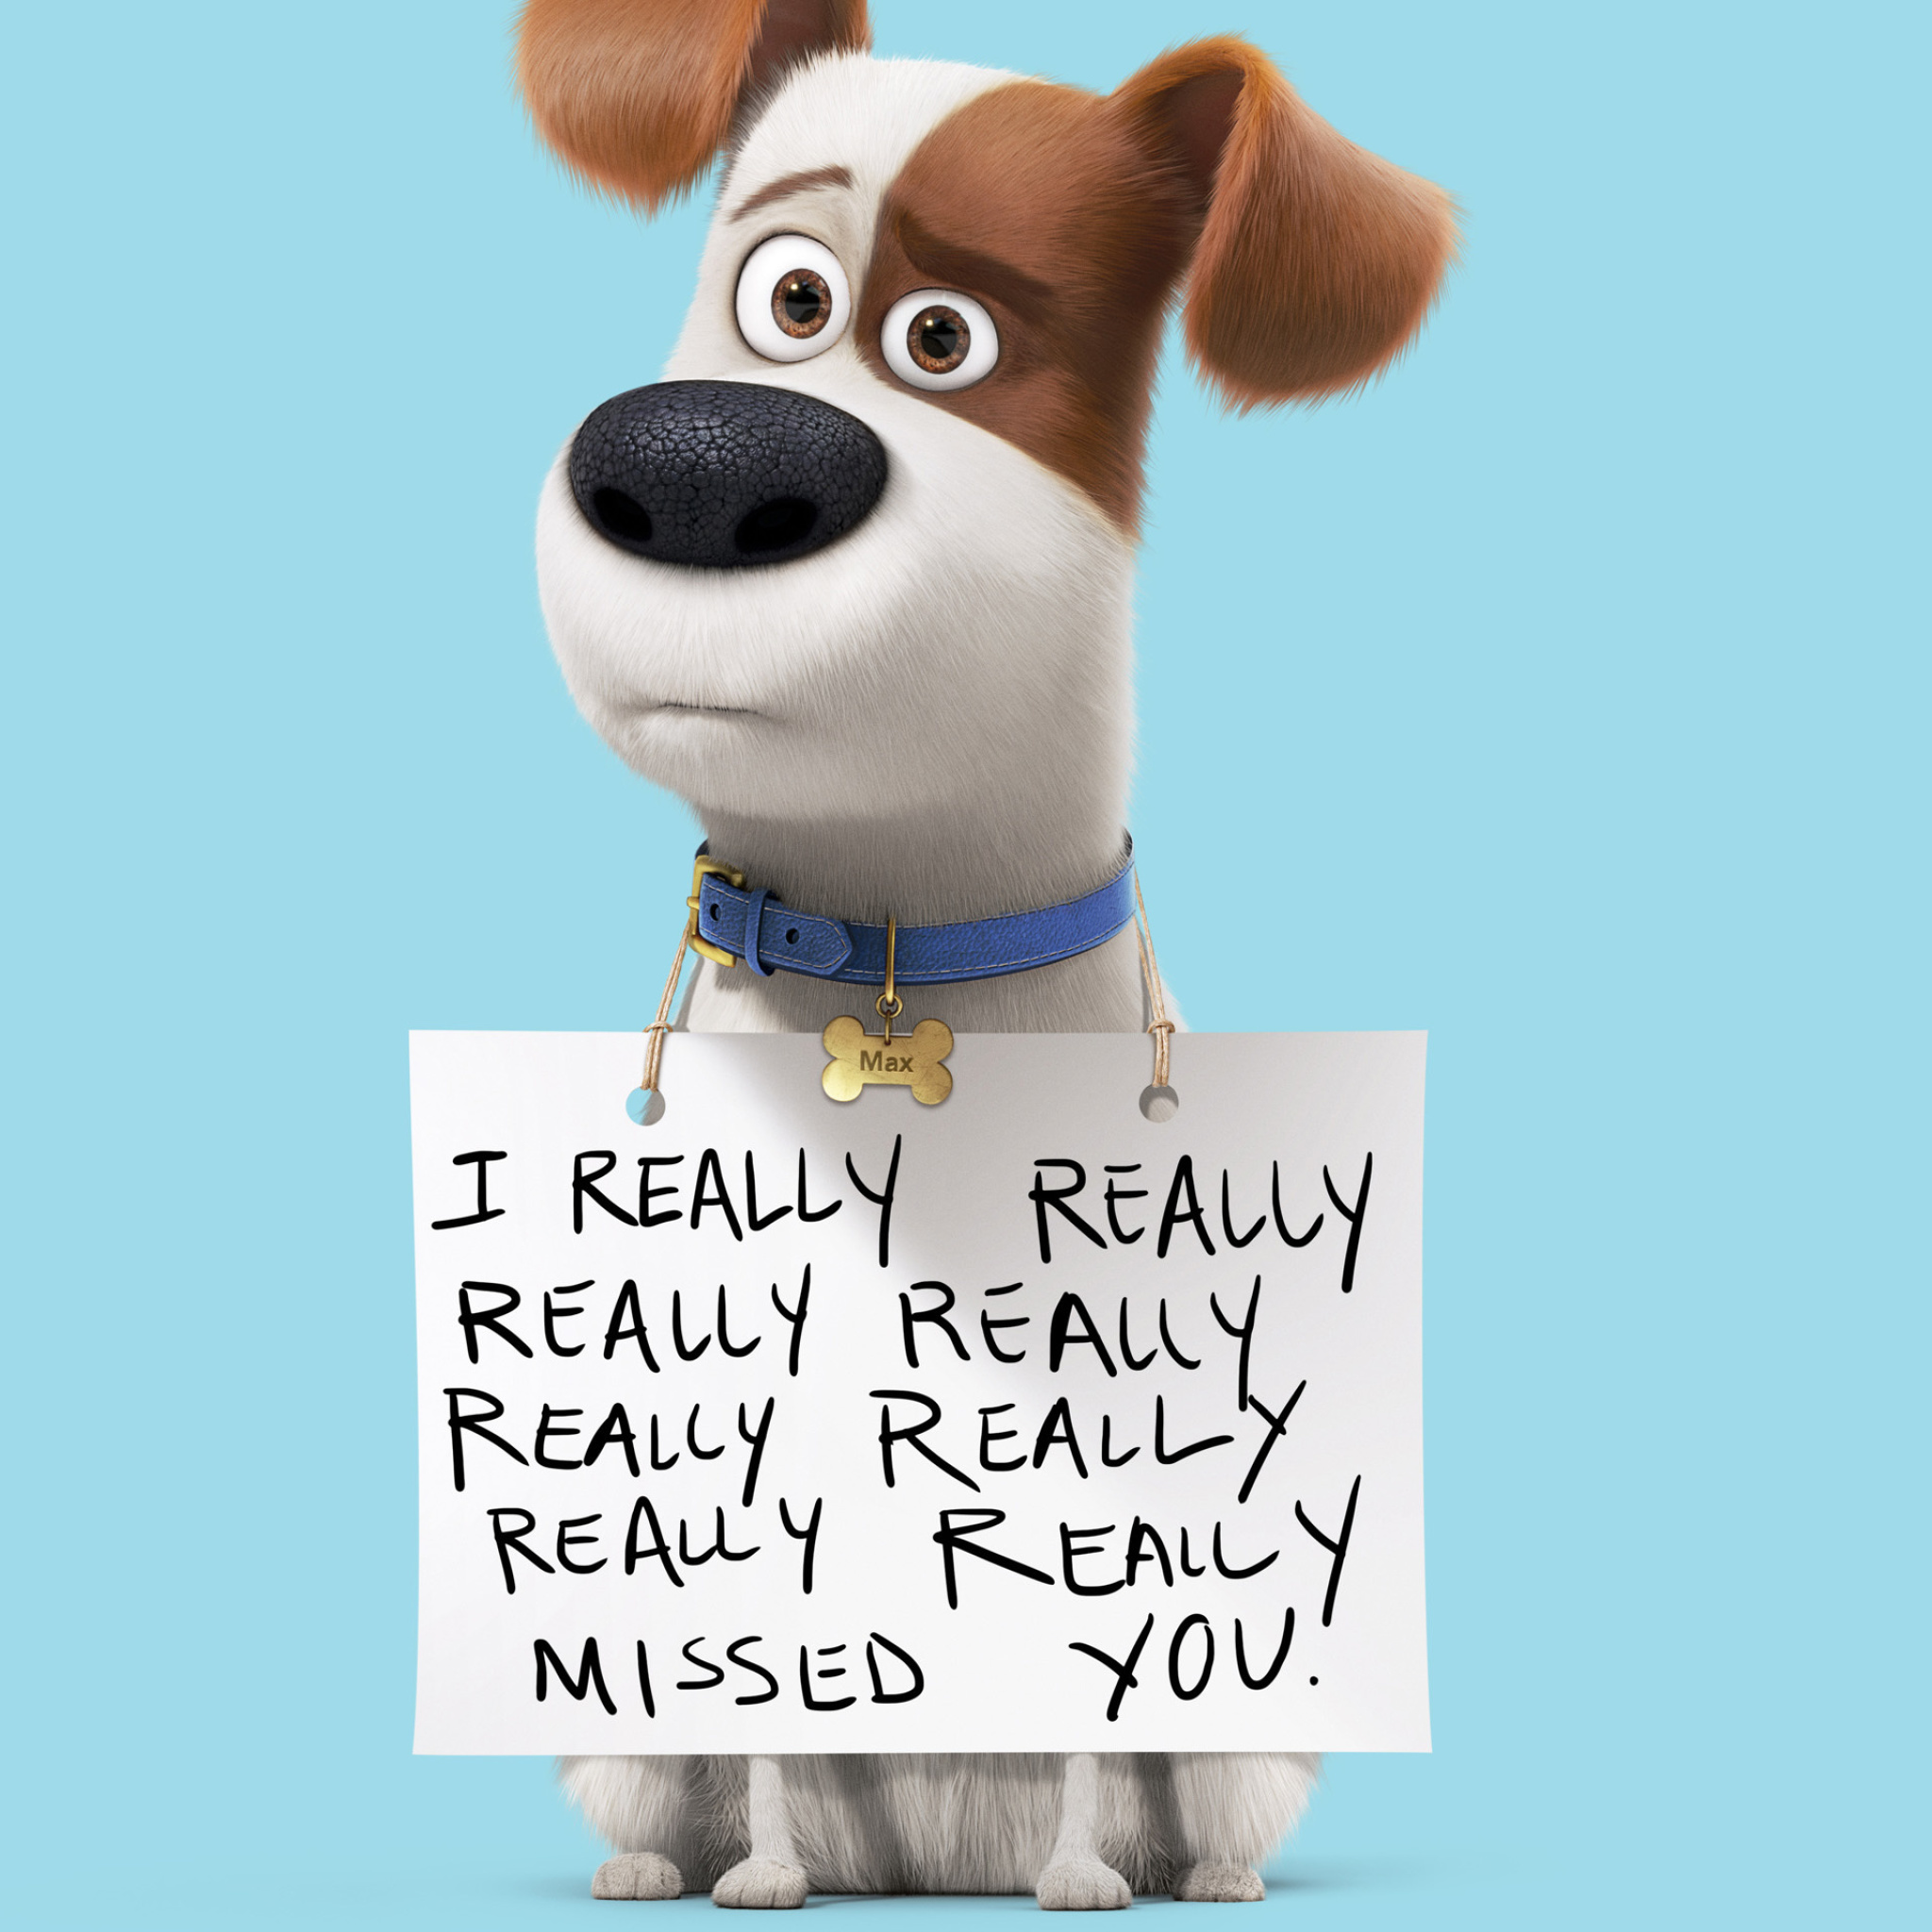 Обои Max from The Secret Life of Pets 2048x2048